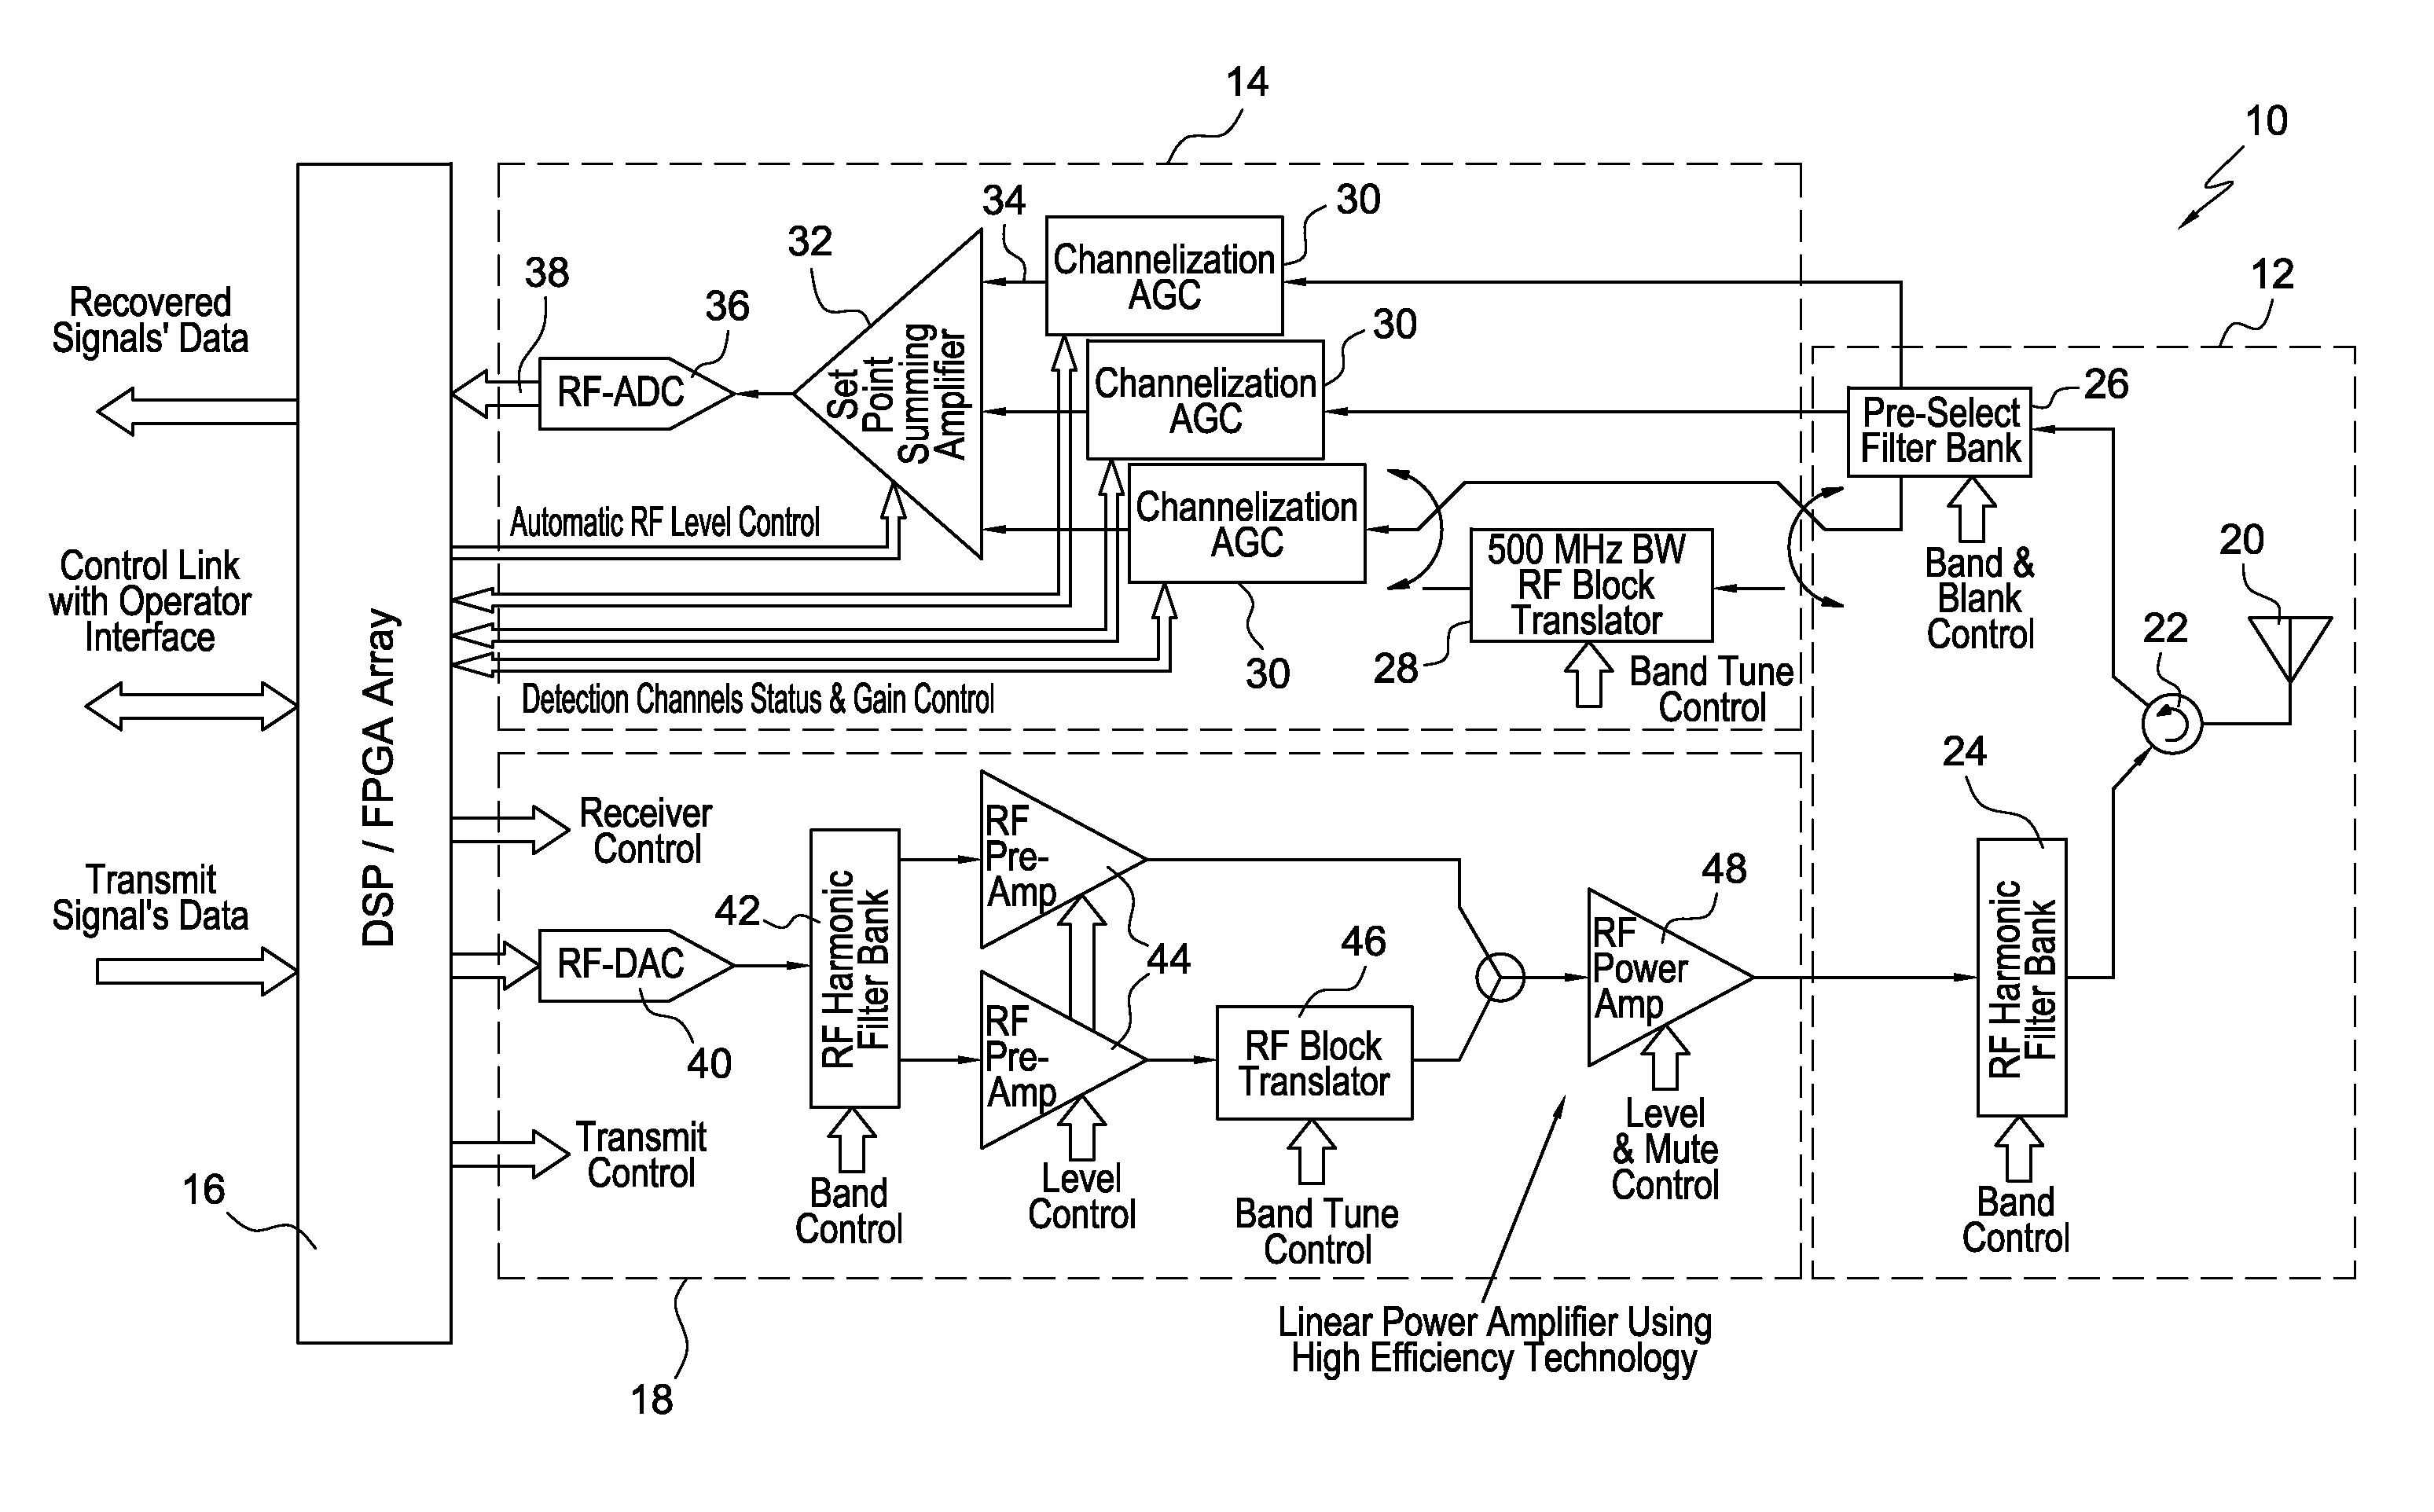 Multi-signal, software-defined and staring cognitive communications system